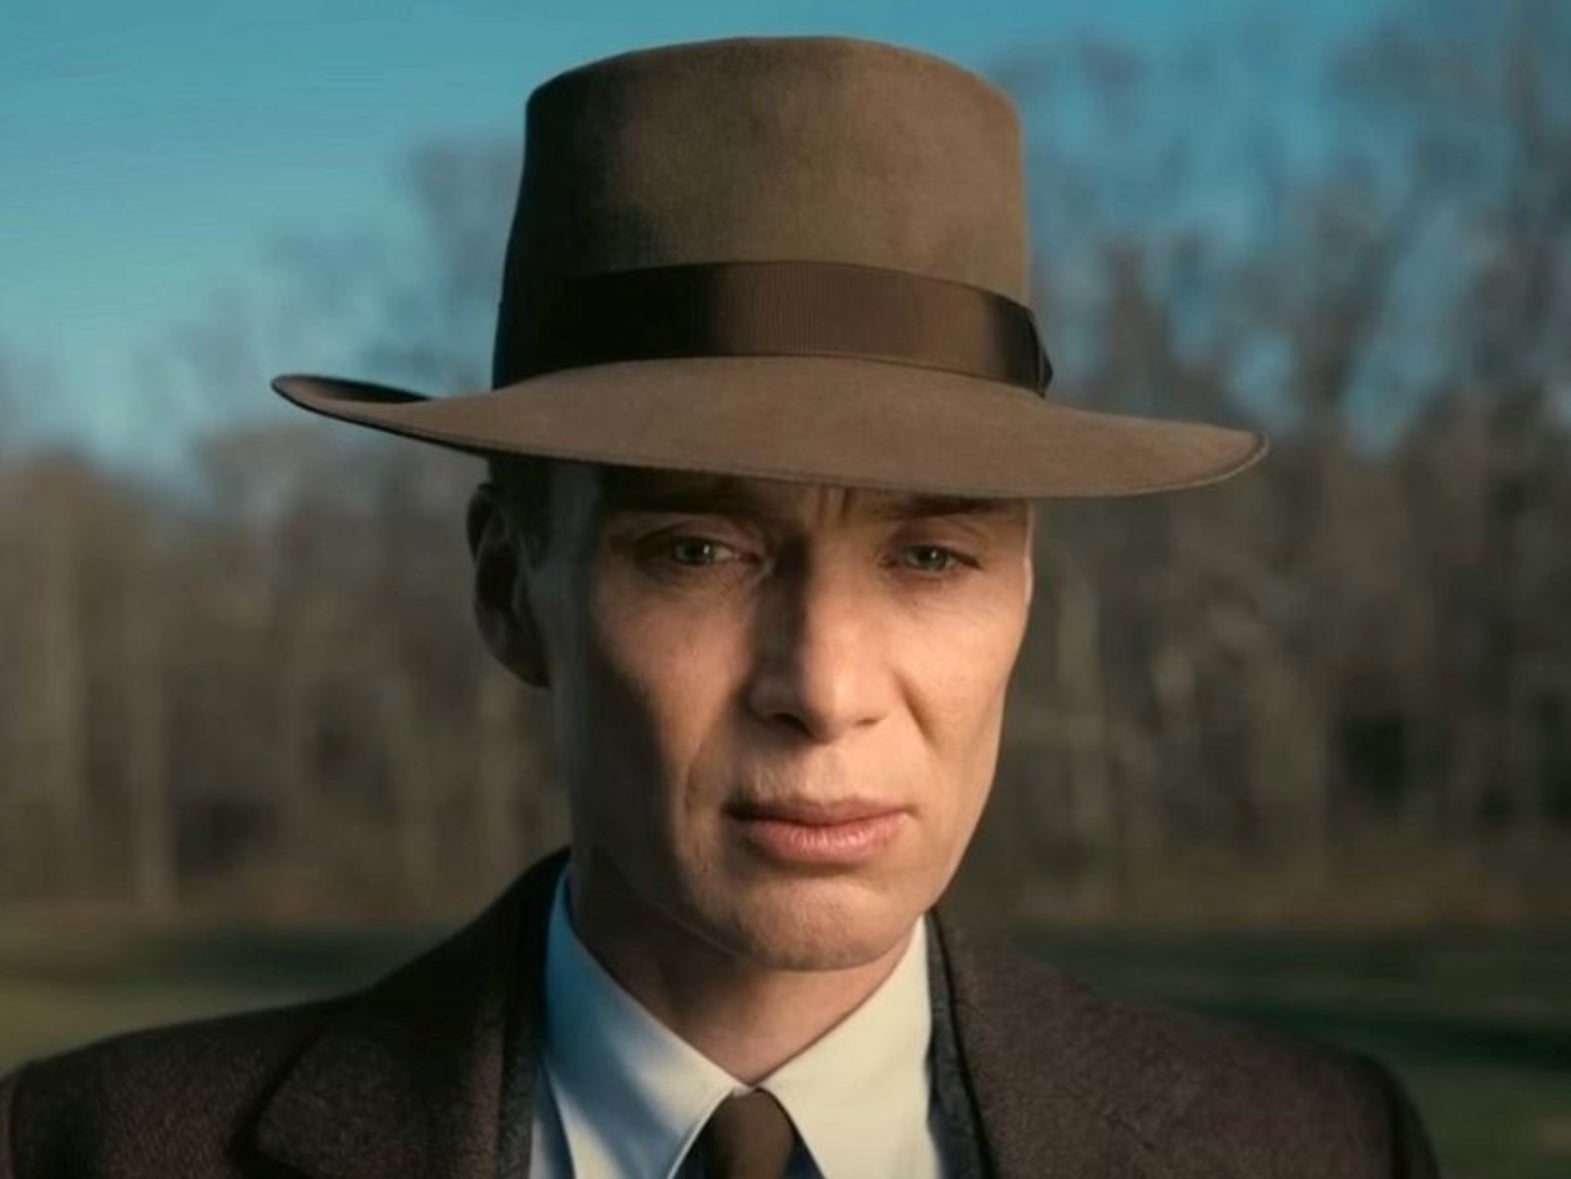 ‘Oppenheimer’ leads the Baftas tally with 13 nominations